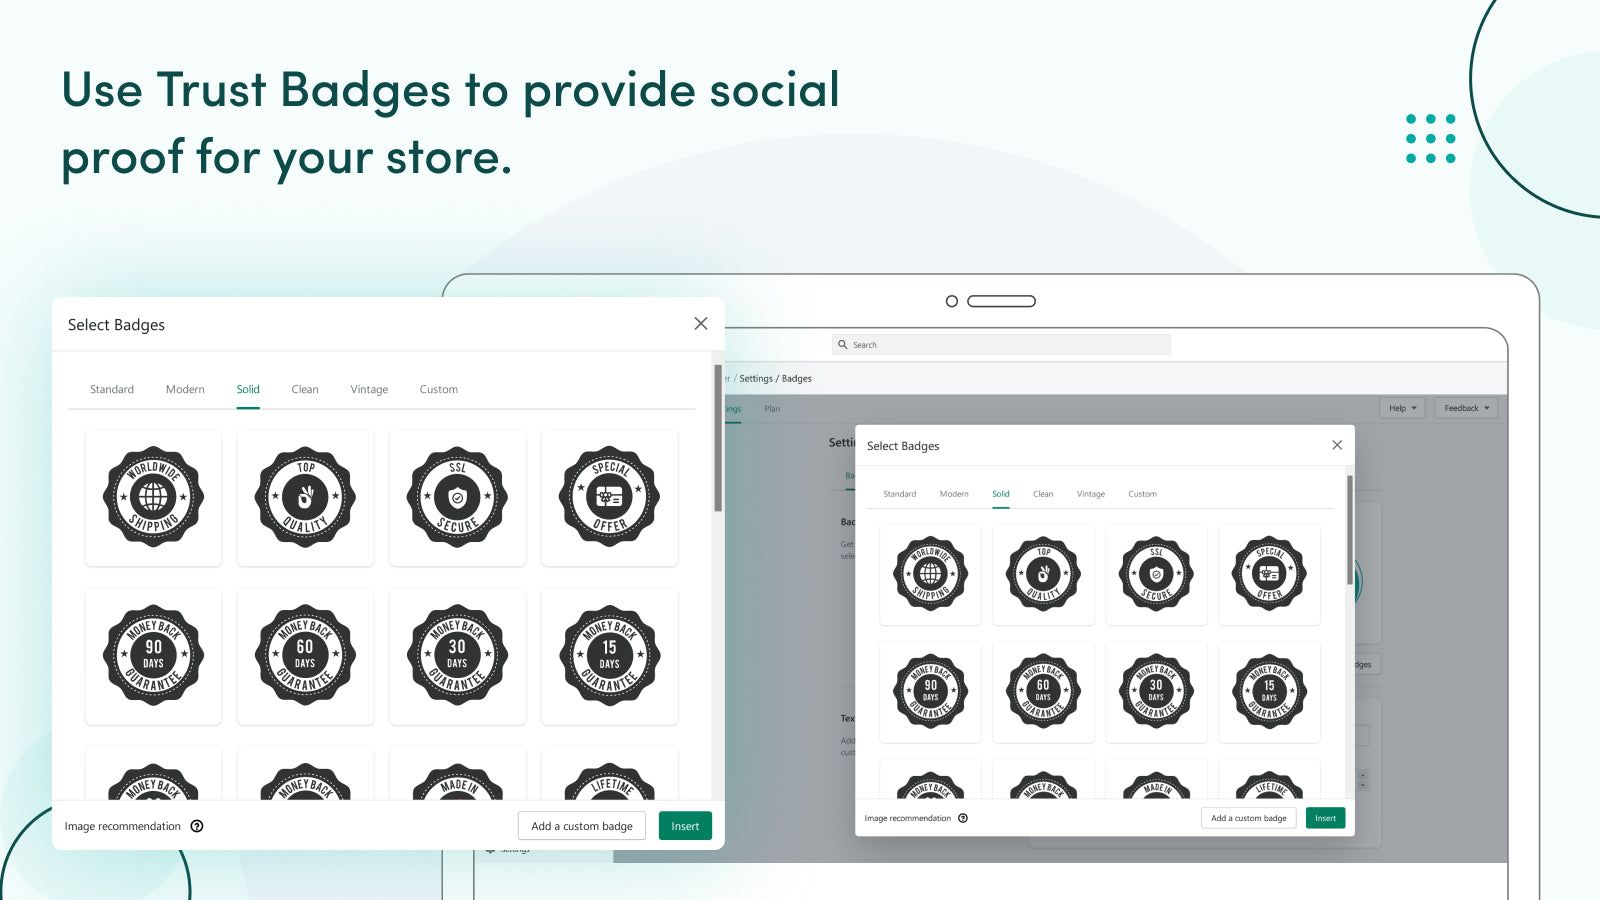 Provide social proof for your store with the Trust Badge Master.